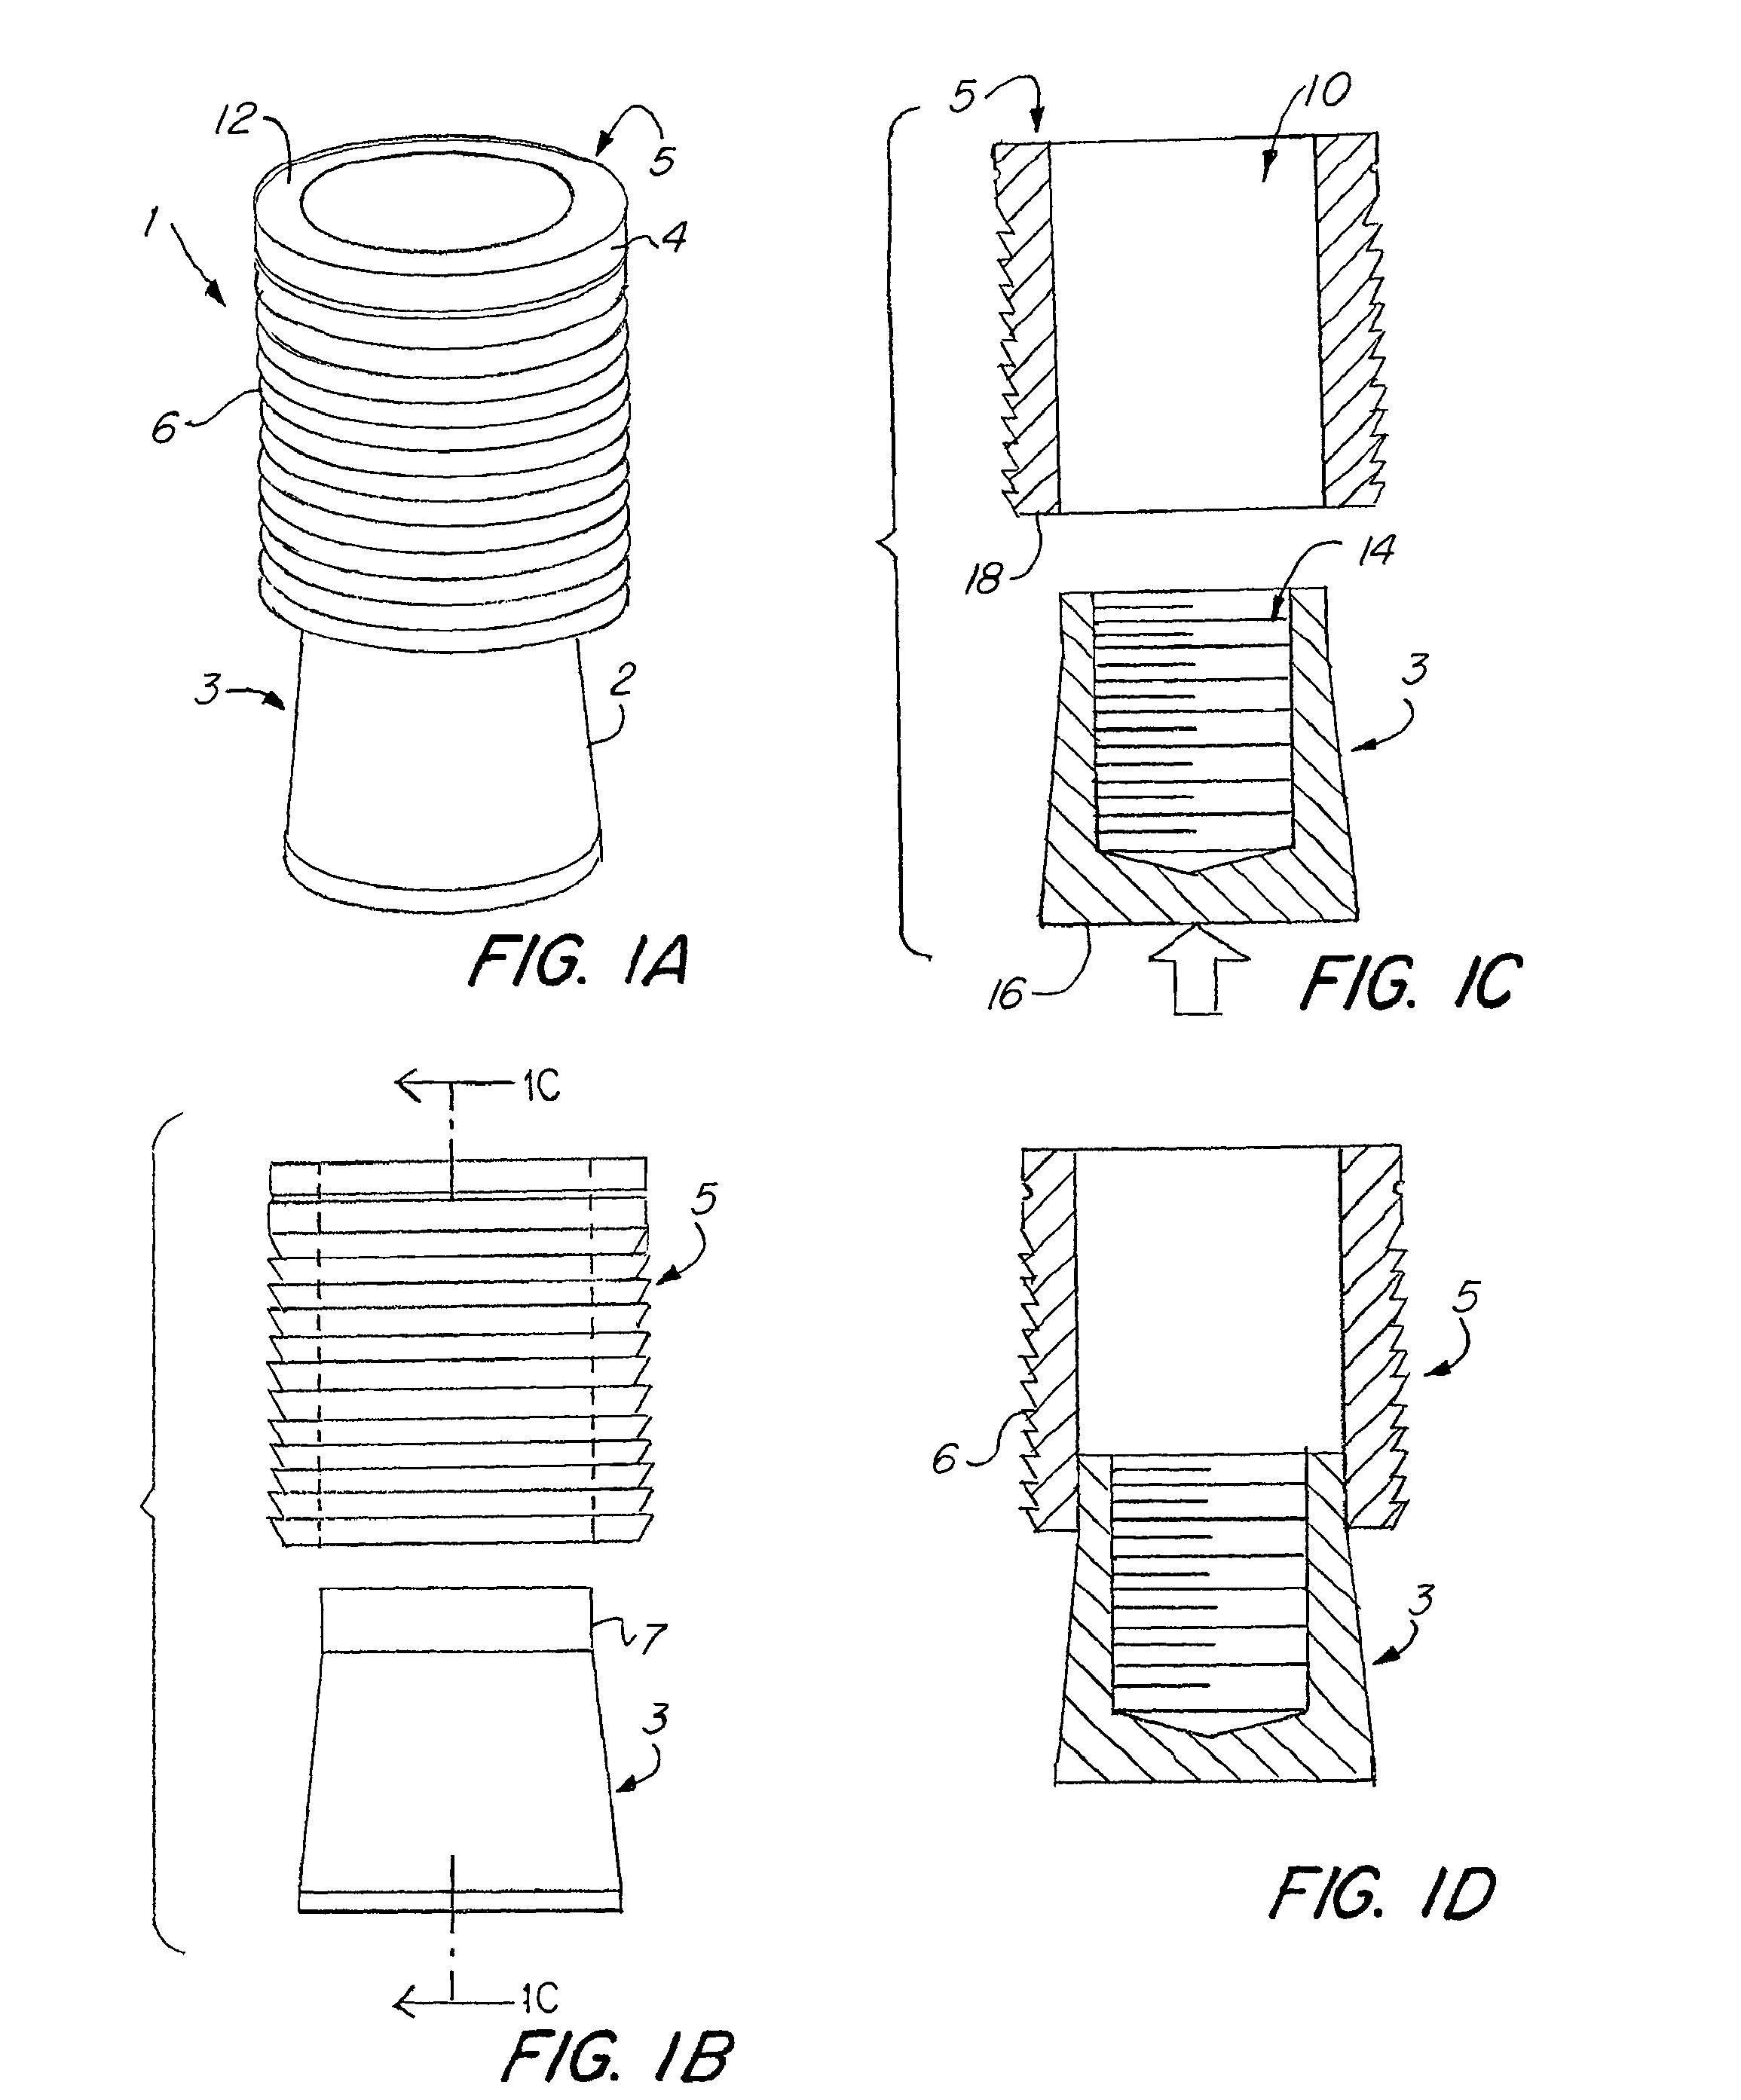 System and Method for Installing a Manifold Plug